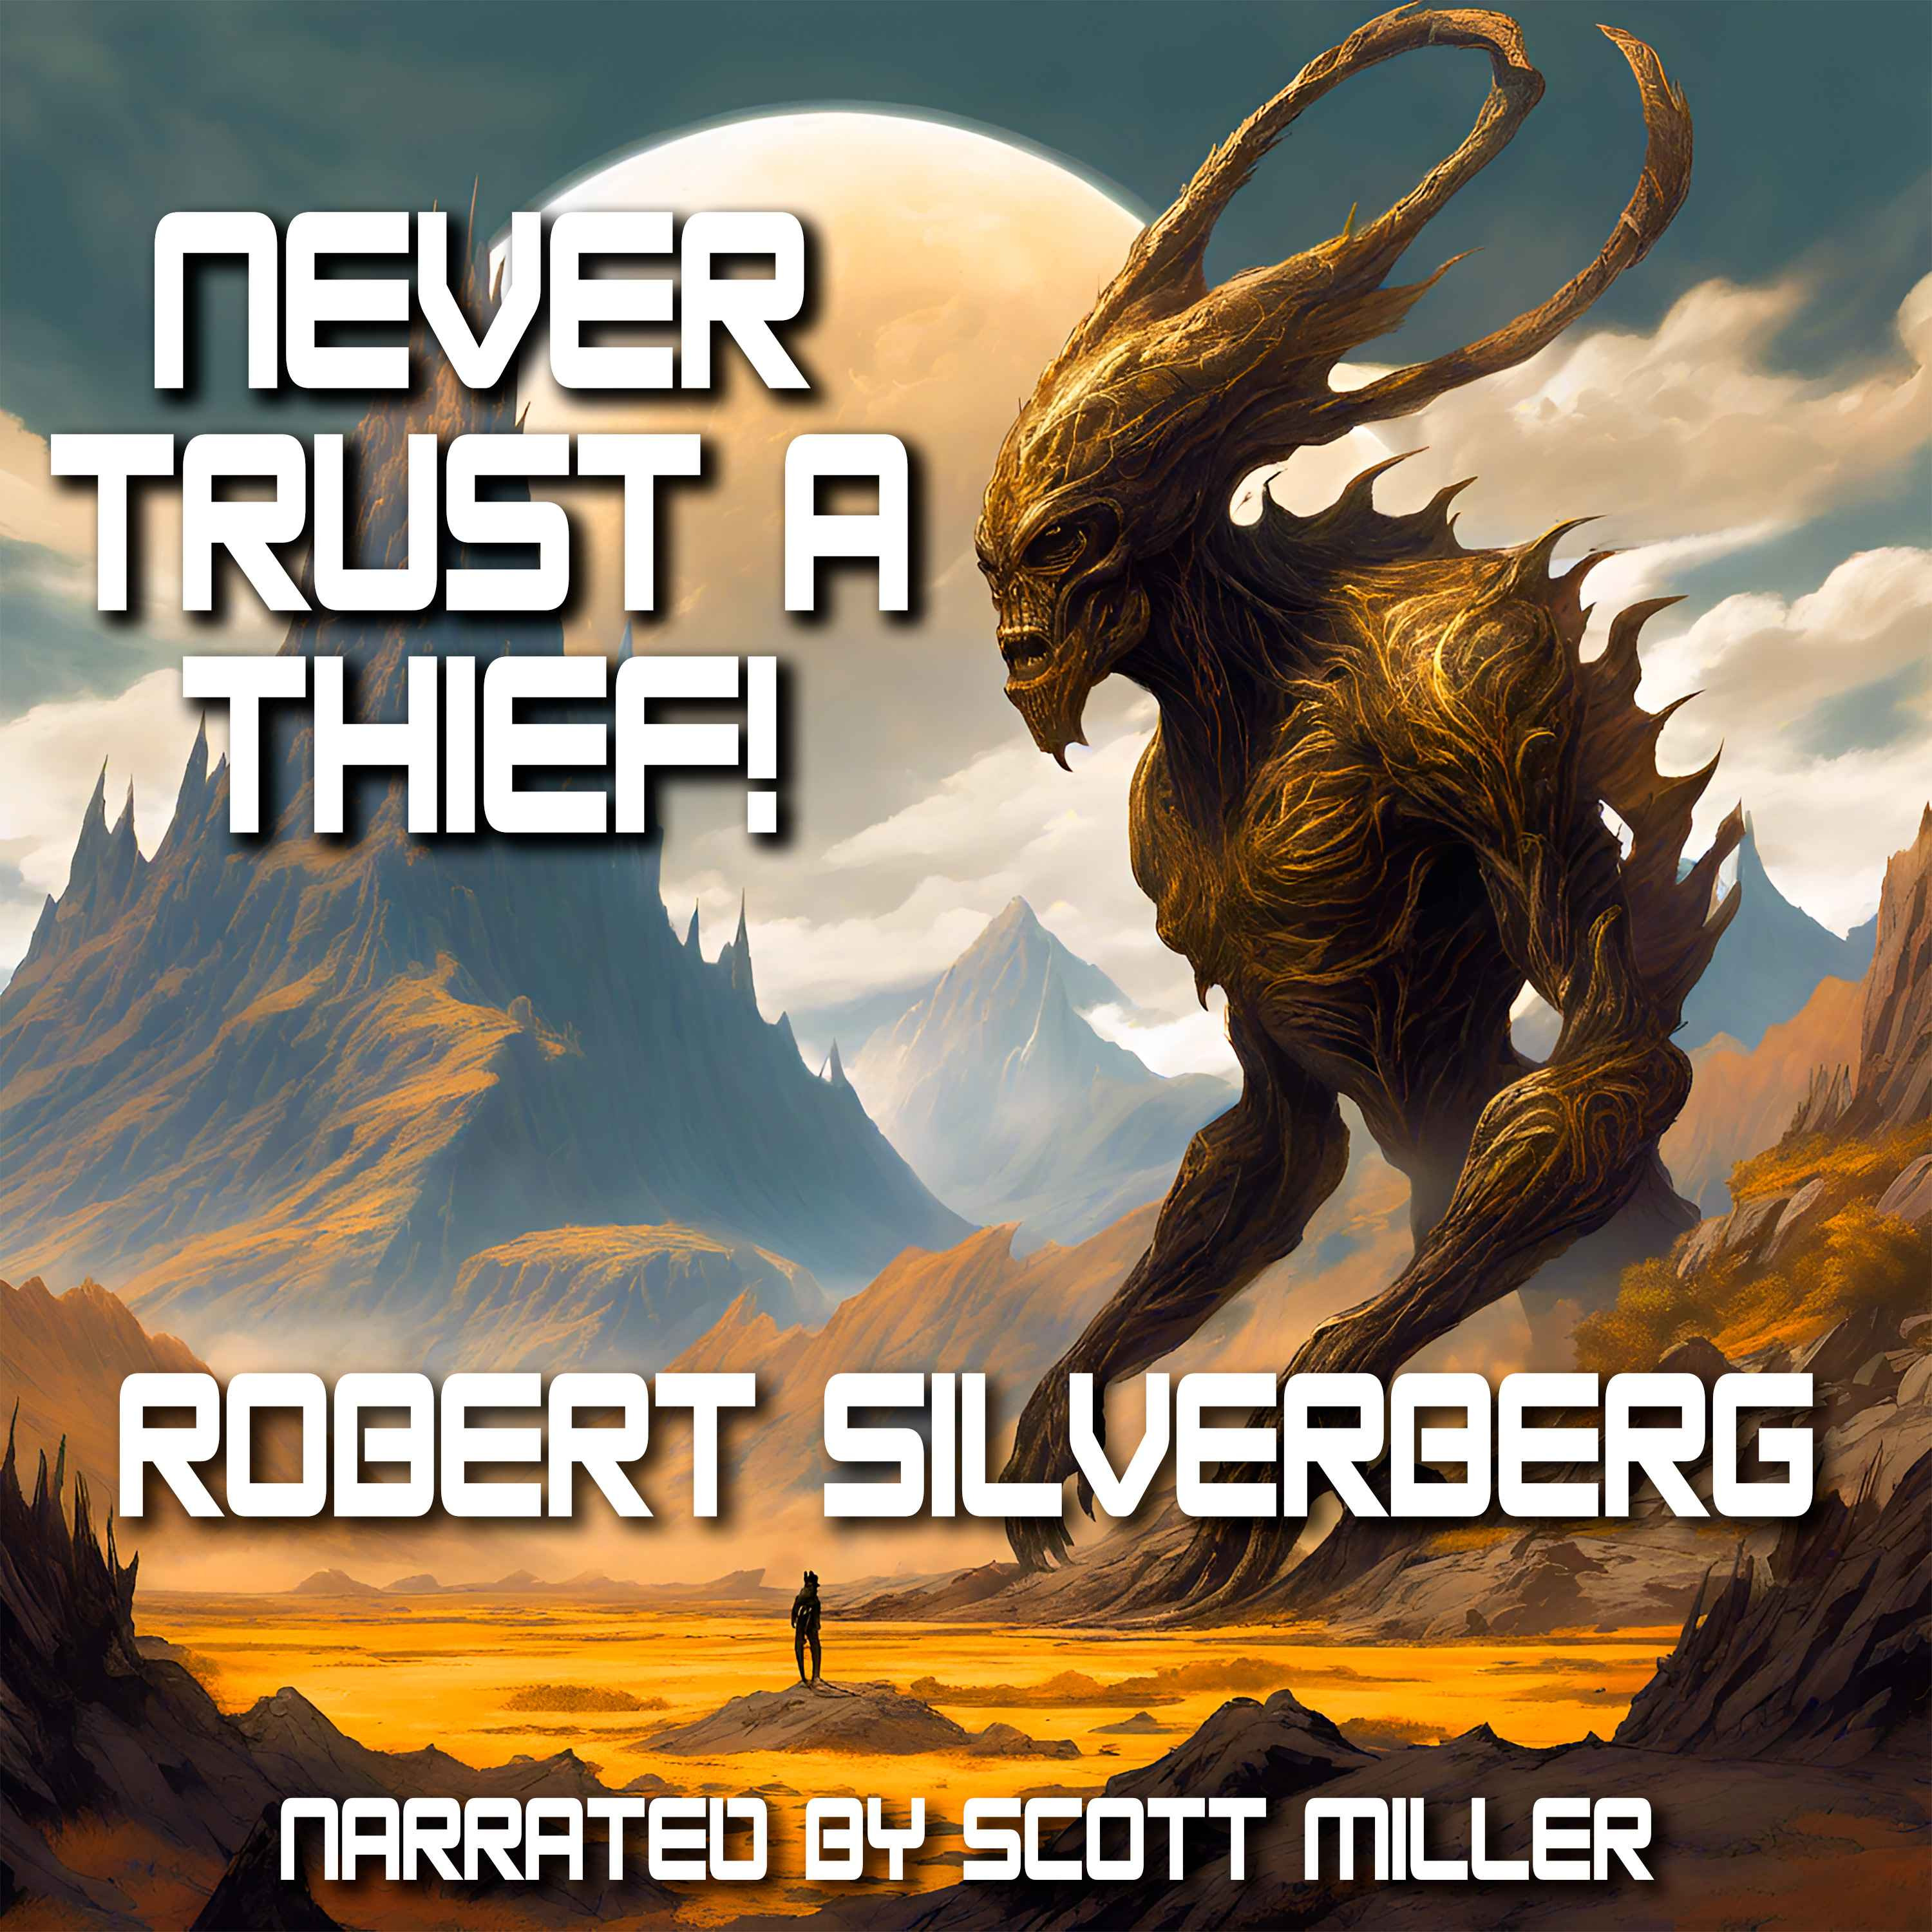 Never Trust A Thief! by Robert Silverberg - Short Science Fiction Story From the 1950s